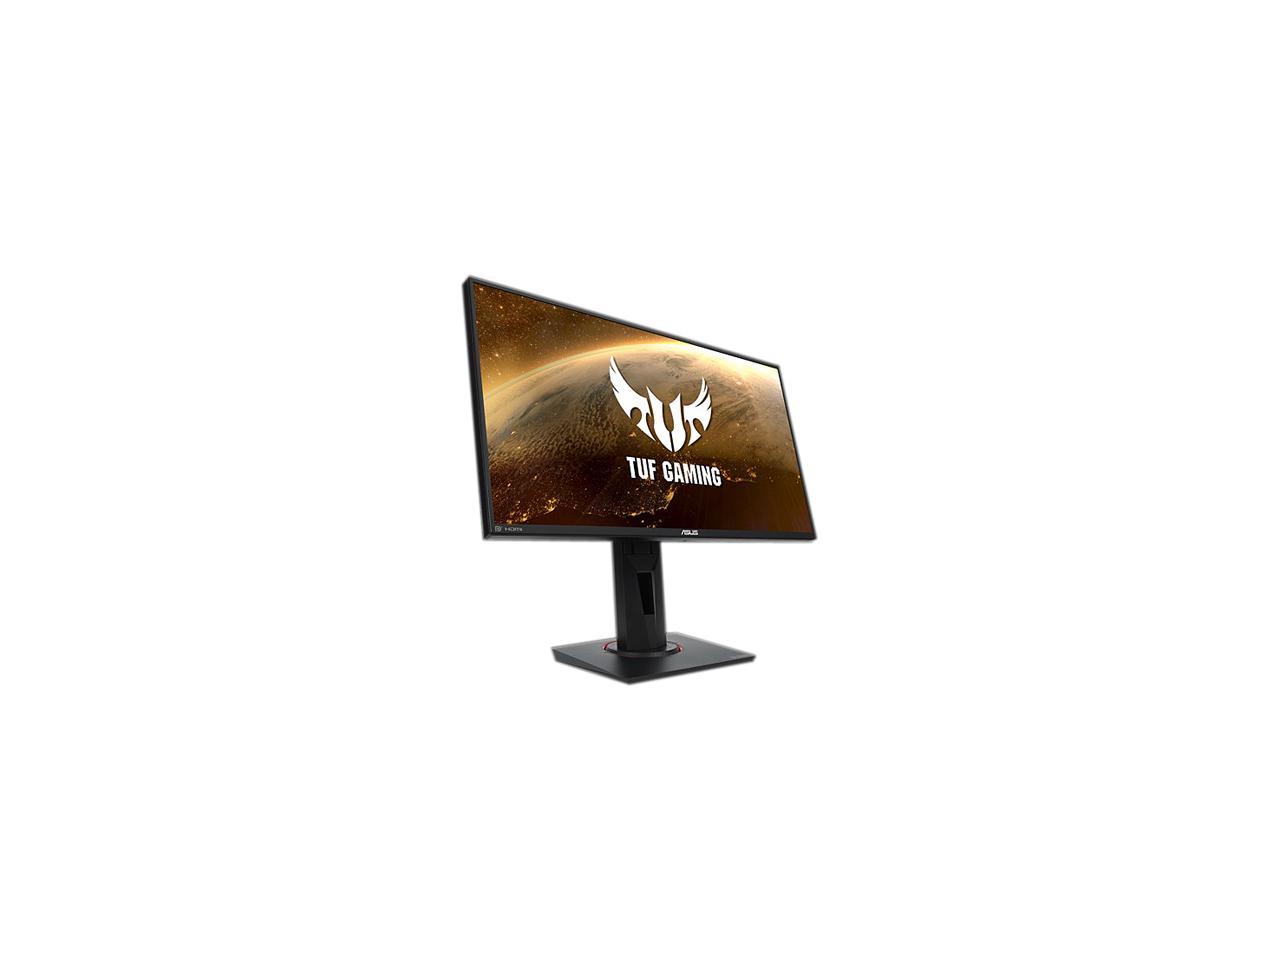 ASUS TUF Gaming VG259QR 25" (24.5" Viewable) IPS Monitor, 1080P FHD 165Hz (Supports 144Hz) 1ms Extreme Low Motion Blur G-SYNC Compatible ready Eye Care 2 x HDMI DisplayPort